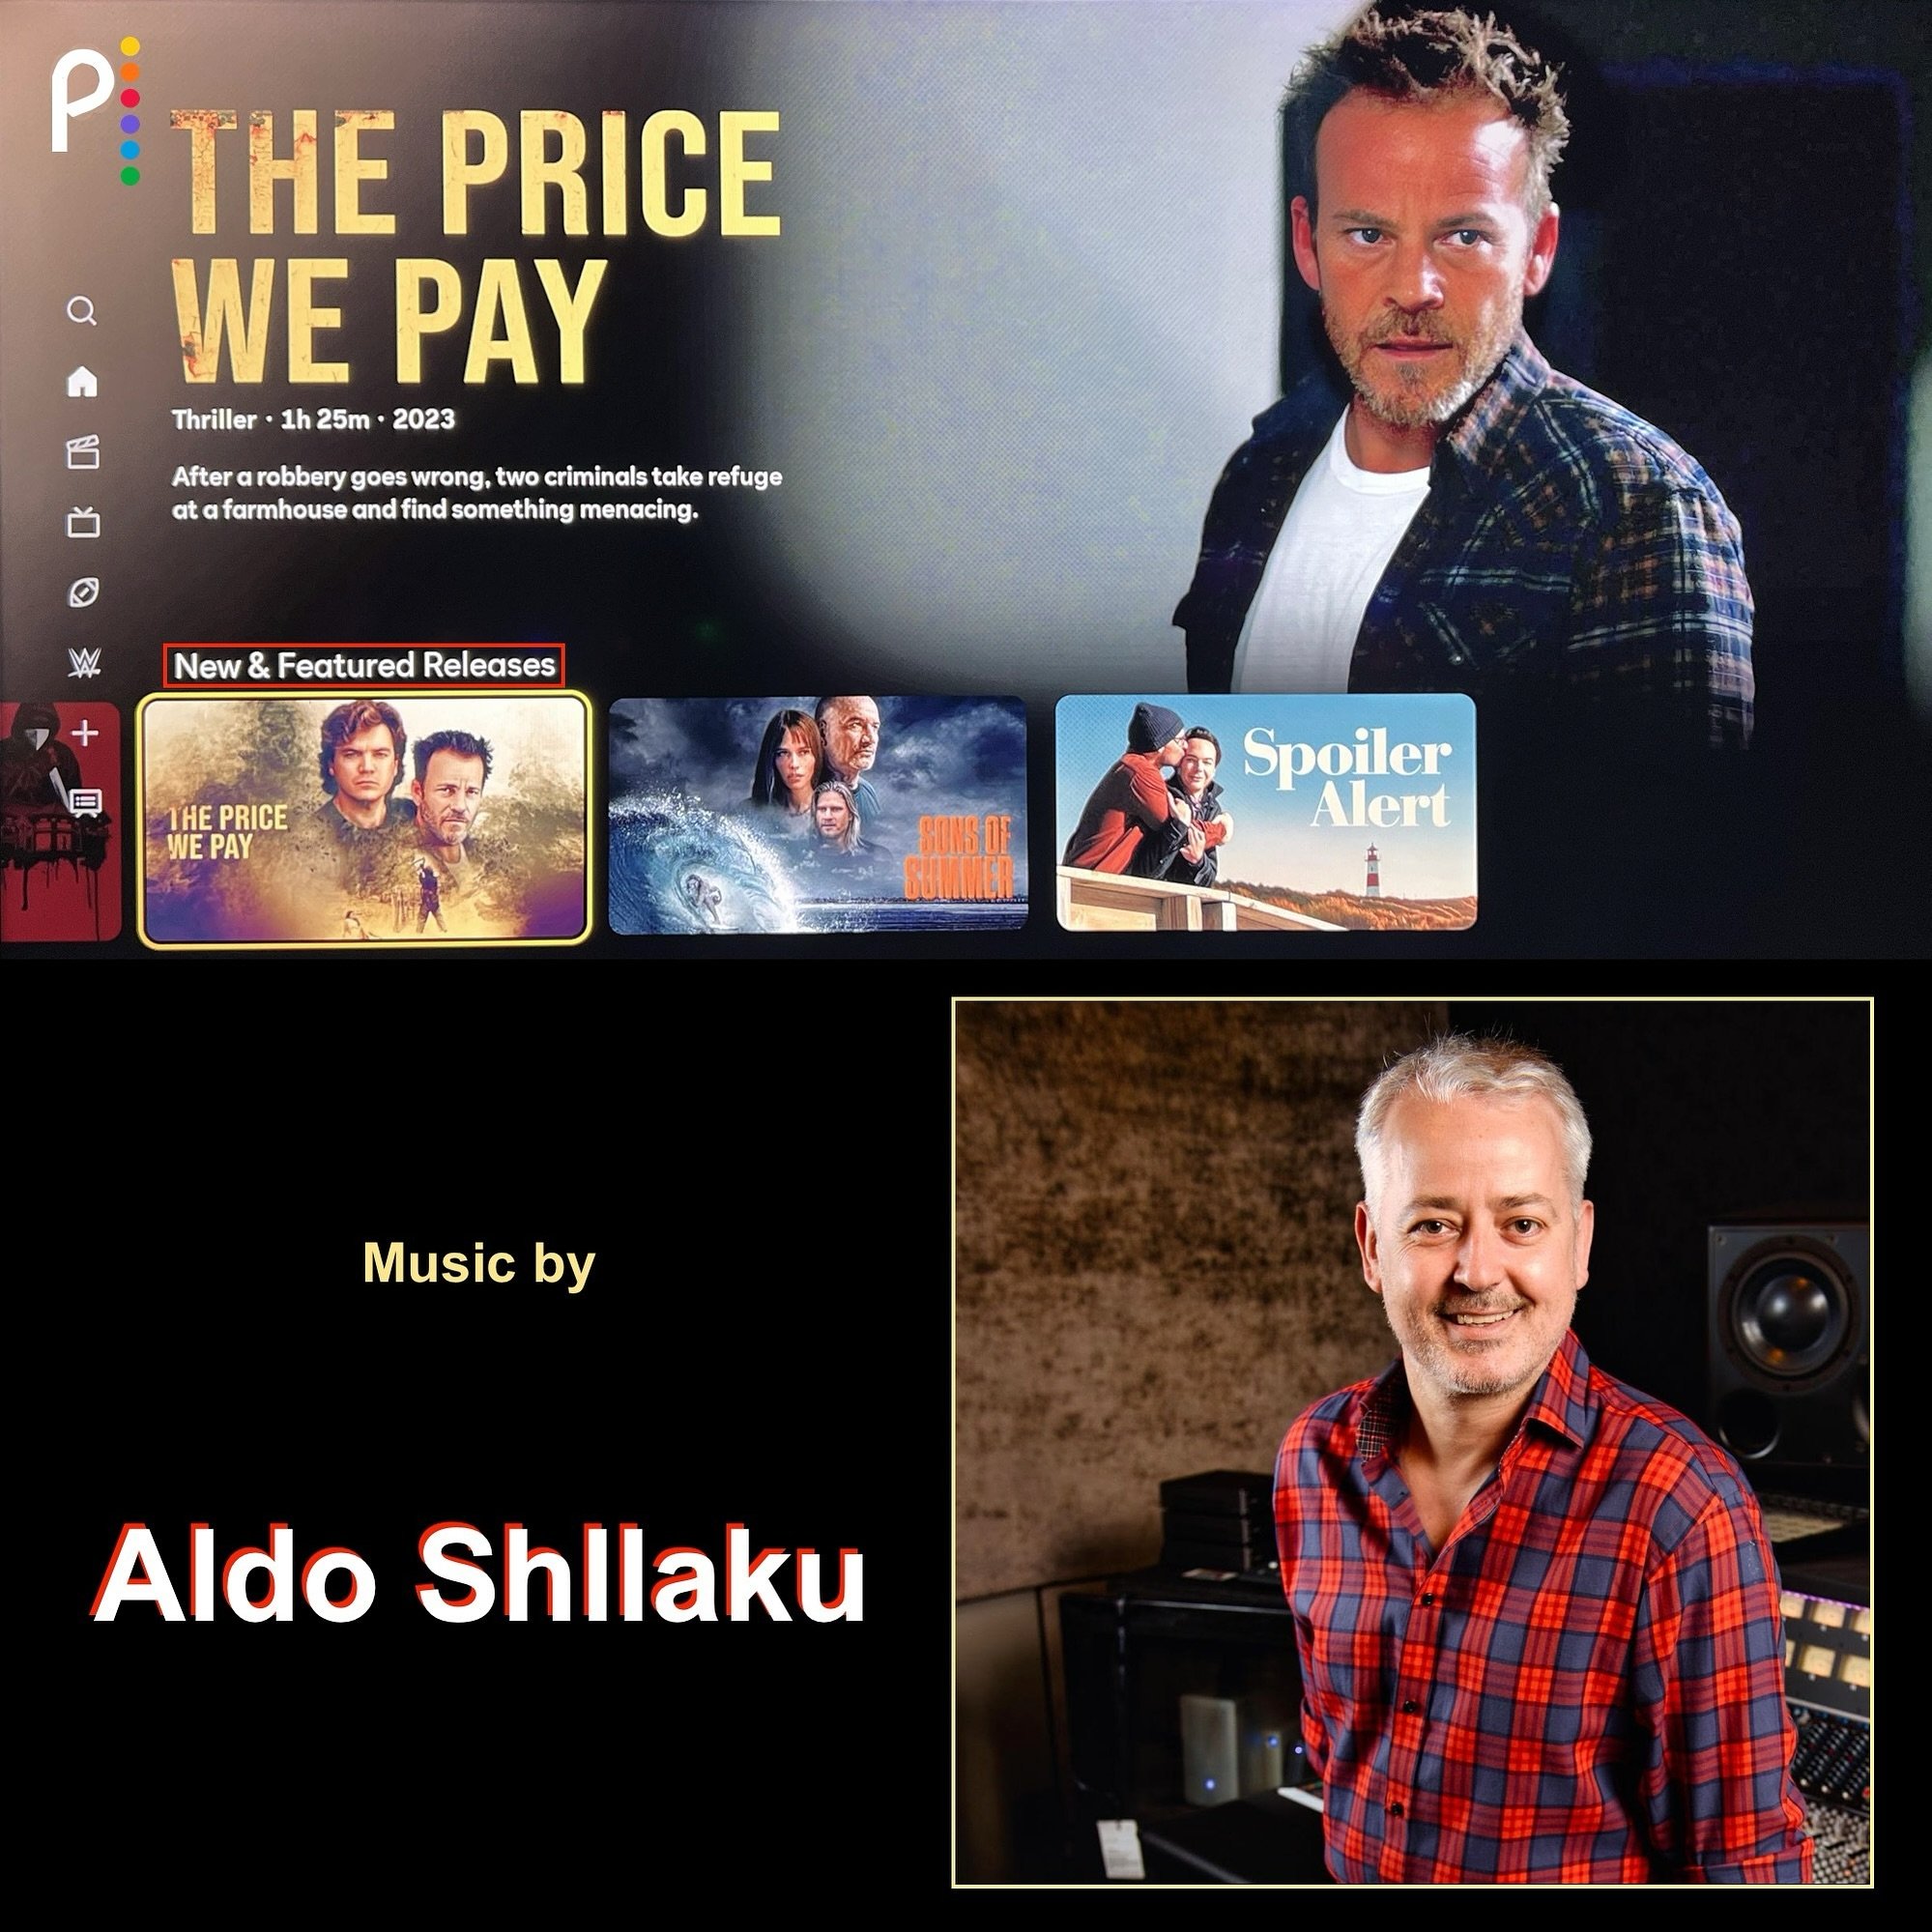 THE PRICE WE PAY is a New &amp; Featured Release on Peacock! This bone chilling horror/thriller film was directed by Ry&ucirc;hei Kitamura&rsquo;s &amp; stars Stephen Dorff &amp; Emile Hirsch. Scoring duties were bestowed upon our client, @shllaku.al